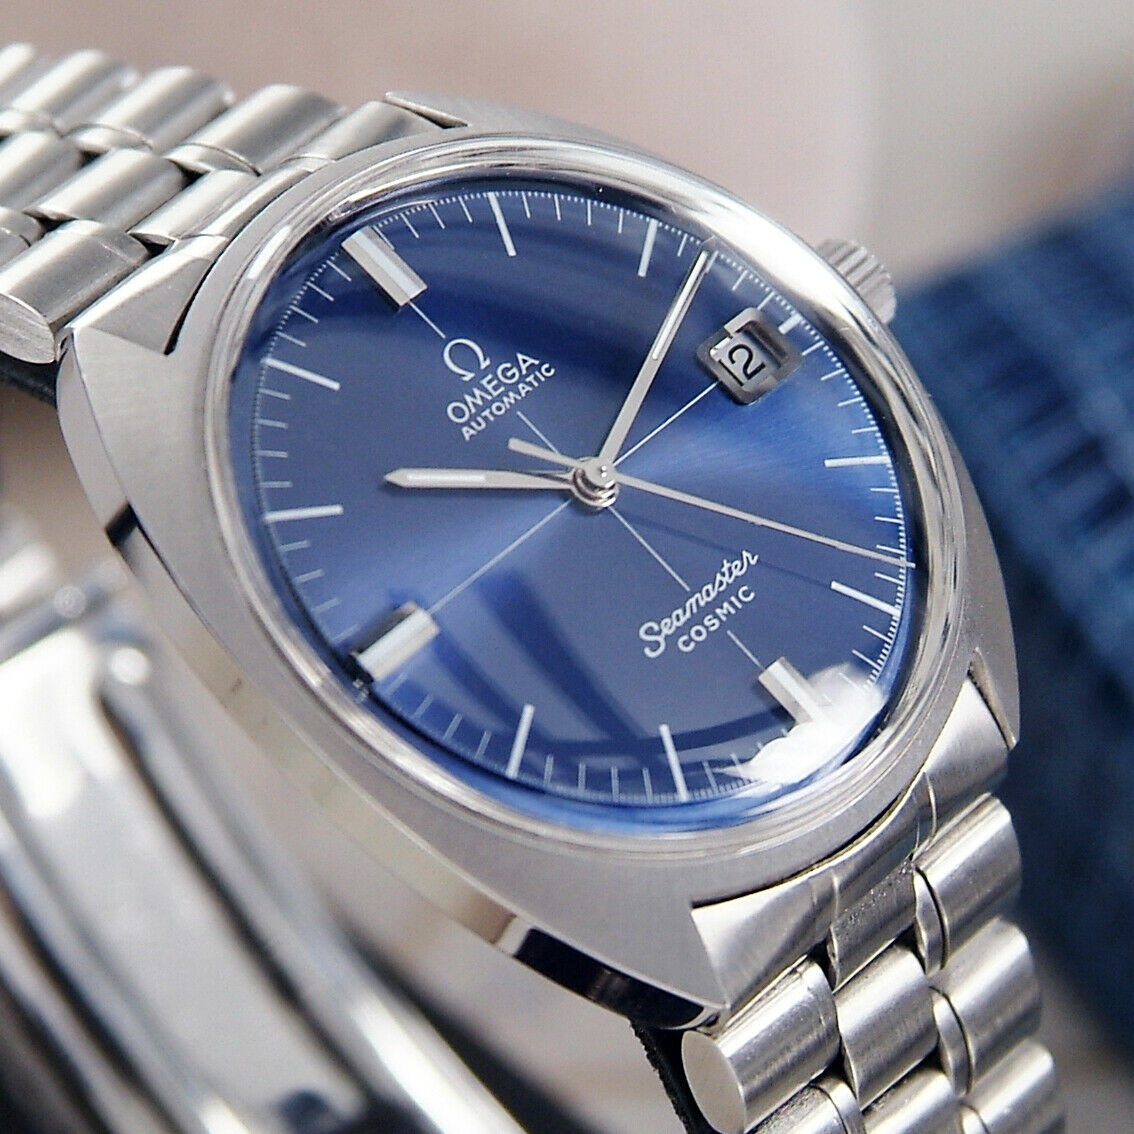 Omega Seamaster Cosmic redial Cal. 565 | Omega Forums